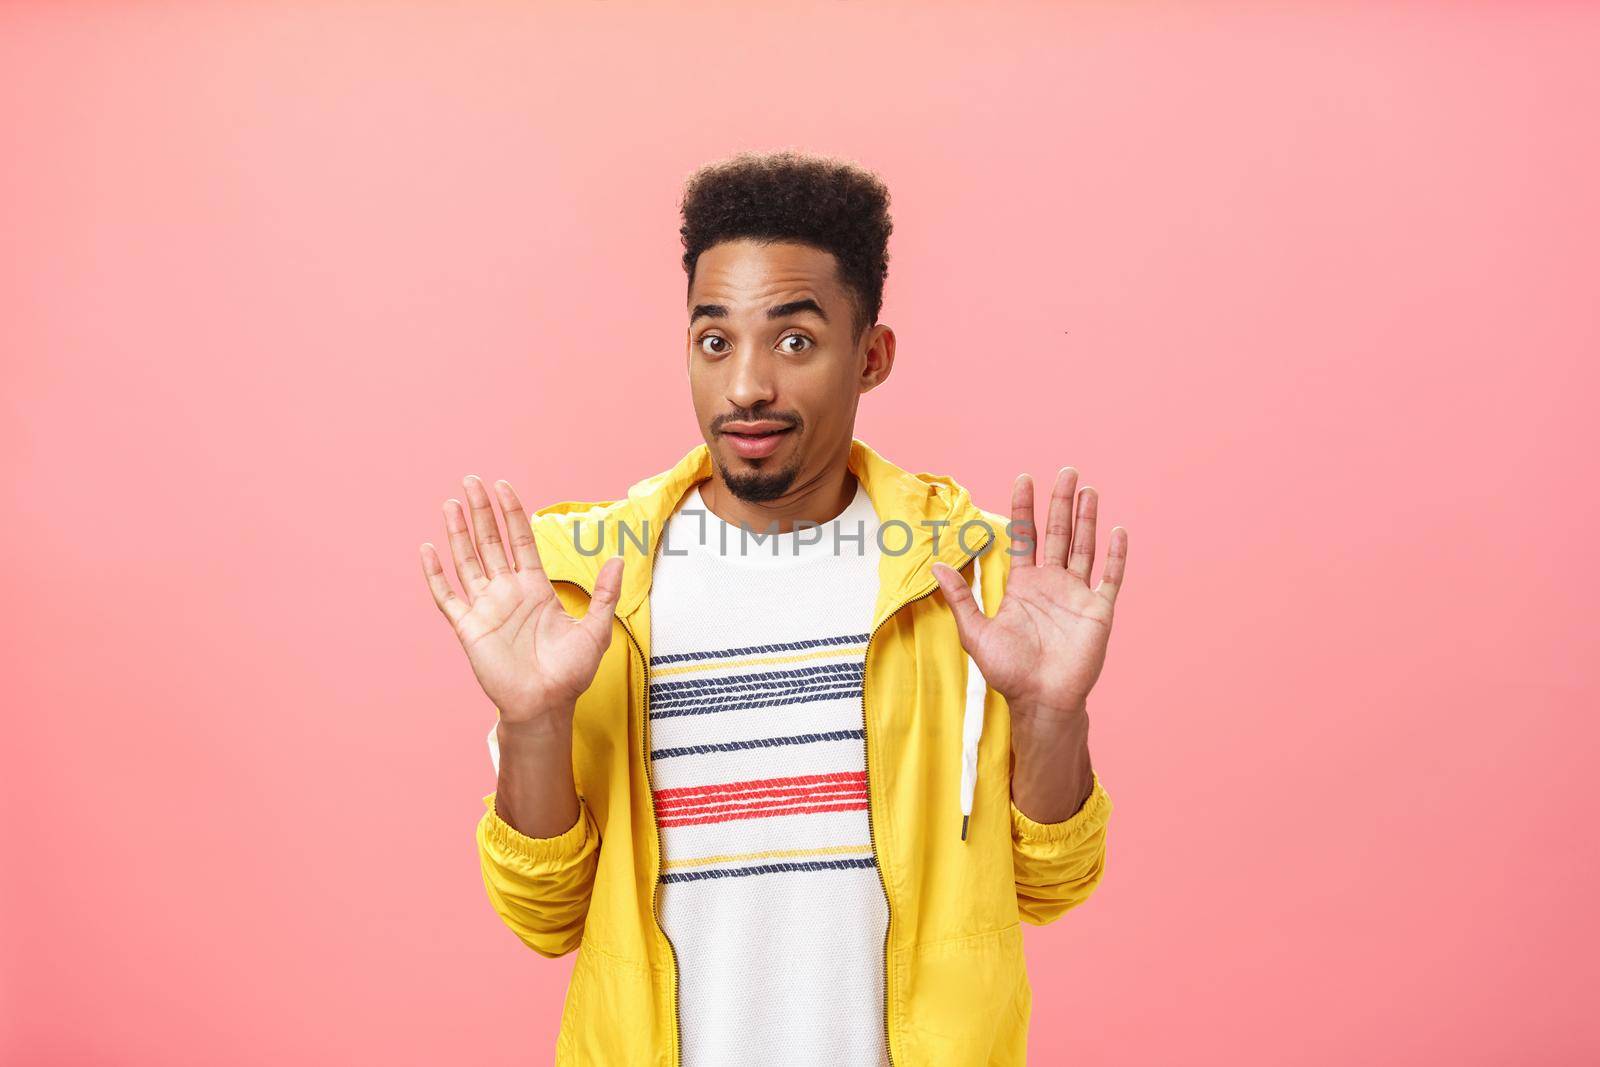 Guy staying out of troubles. Portrait of confused unsure clueless african american guy with beard raising palms in surrender gazing innocent at camera denying everything being unvinvolved.